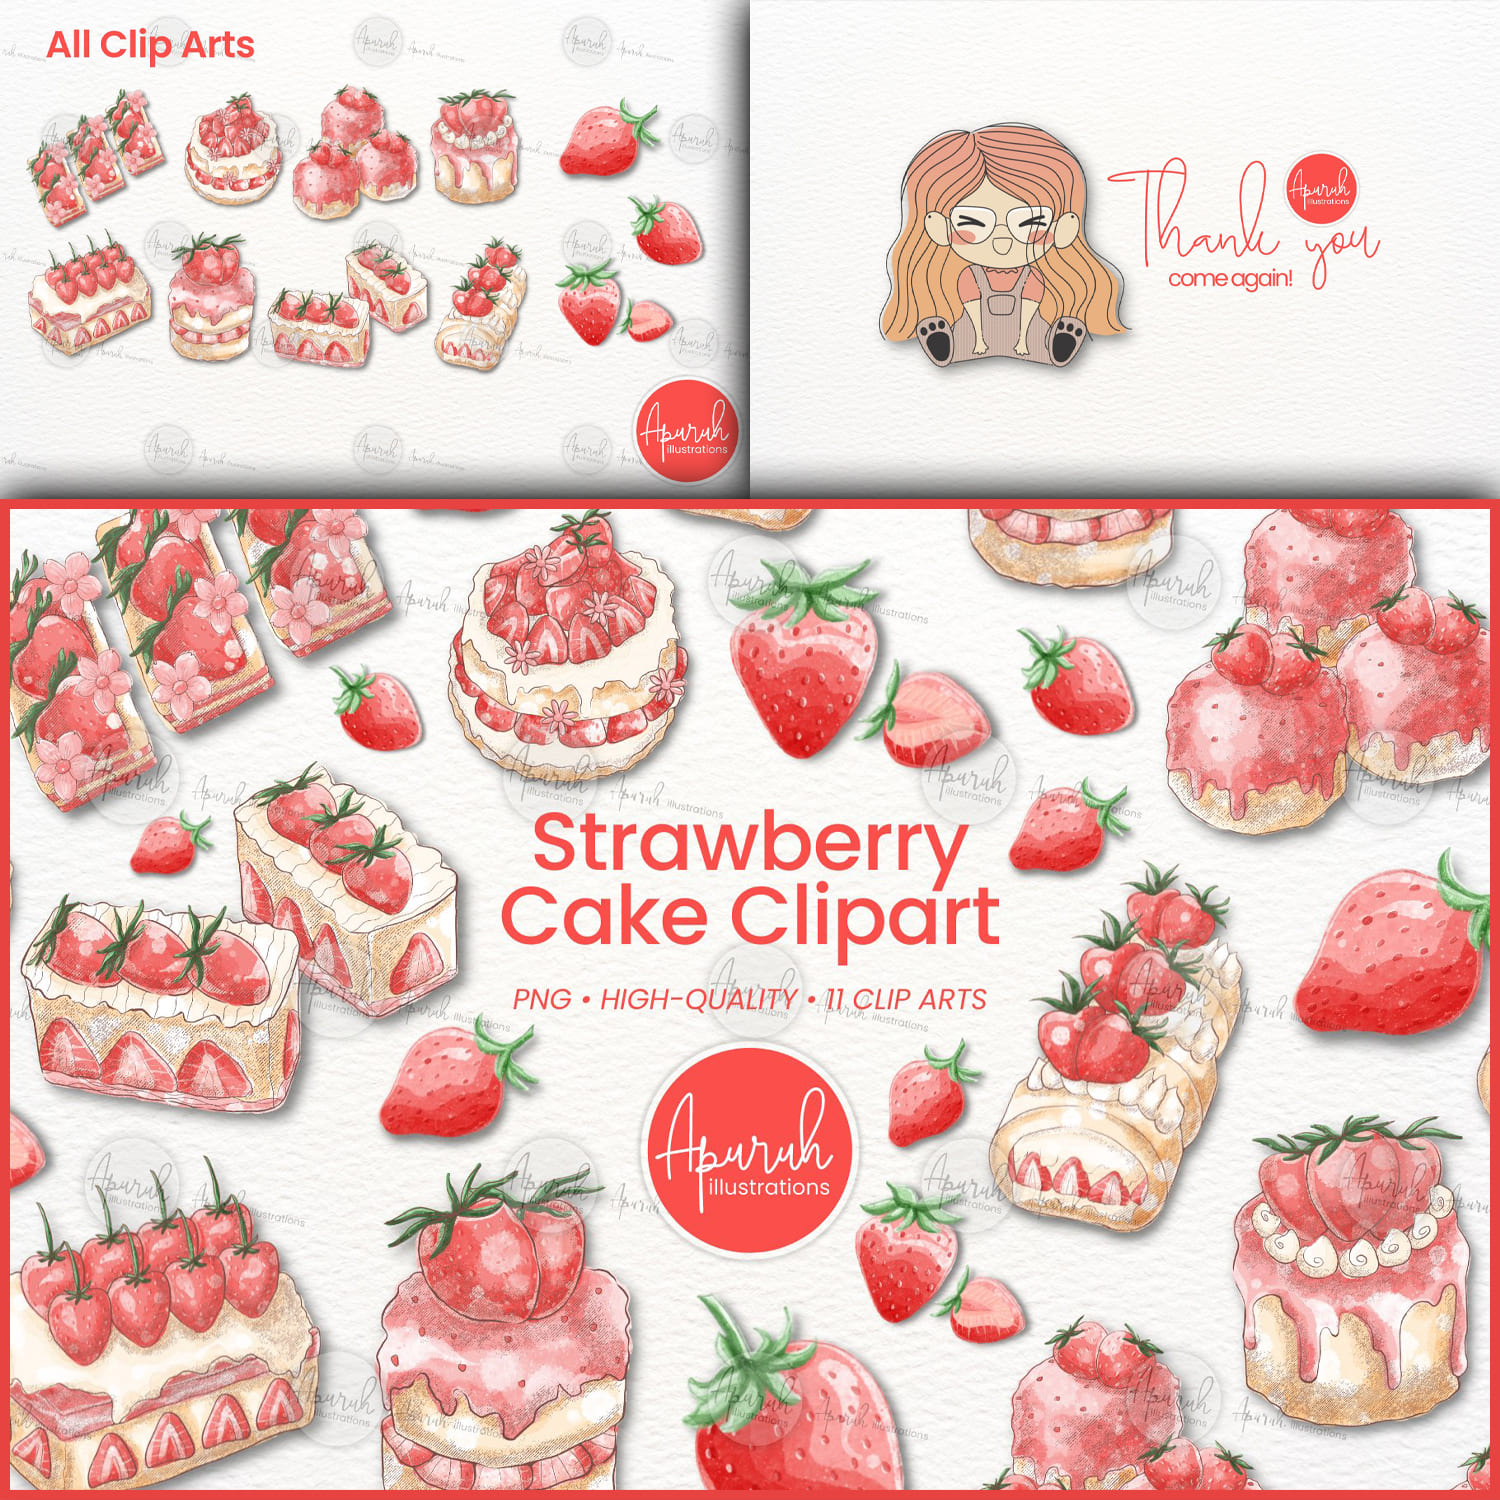 Strawberry Watercolor Cake Clipart Sublimation Created By Apuruh Illustrations.